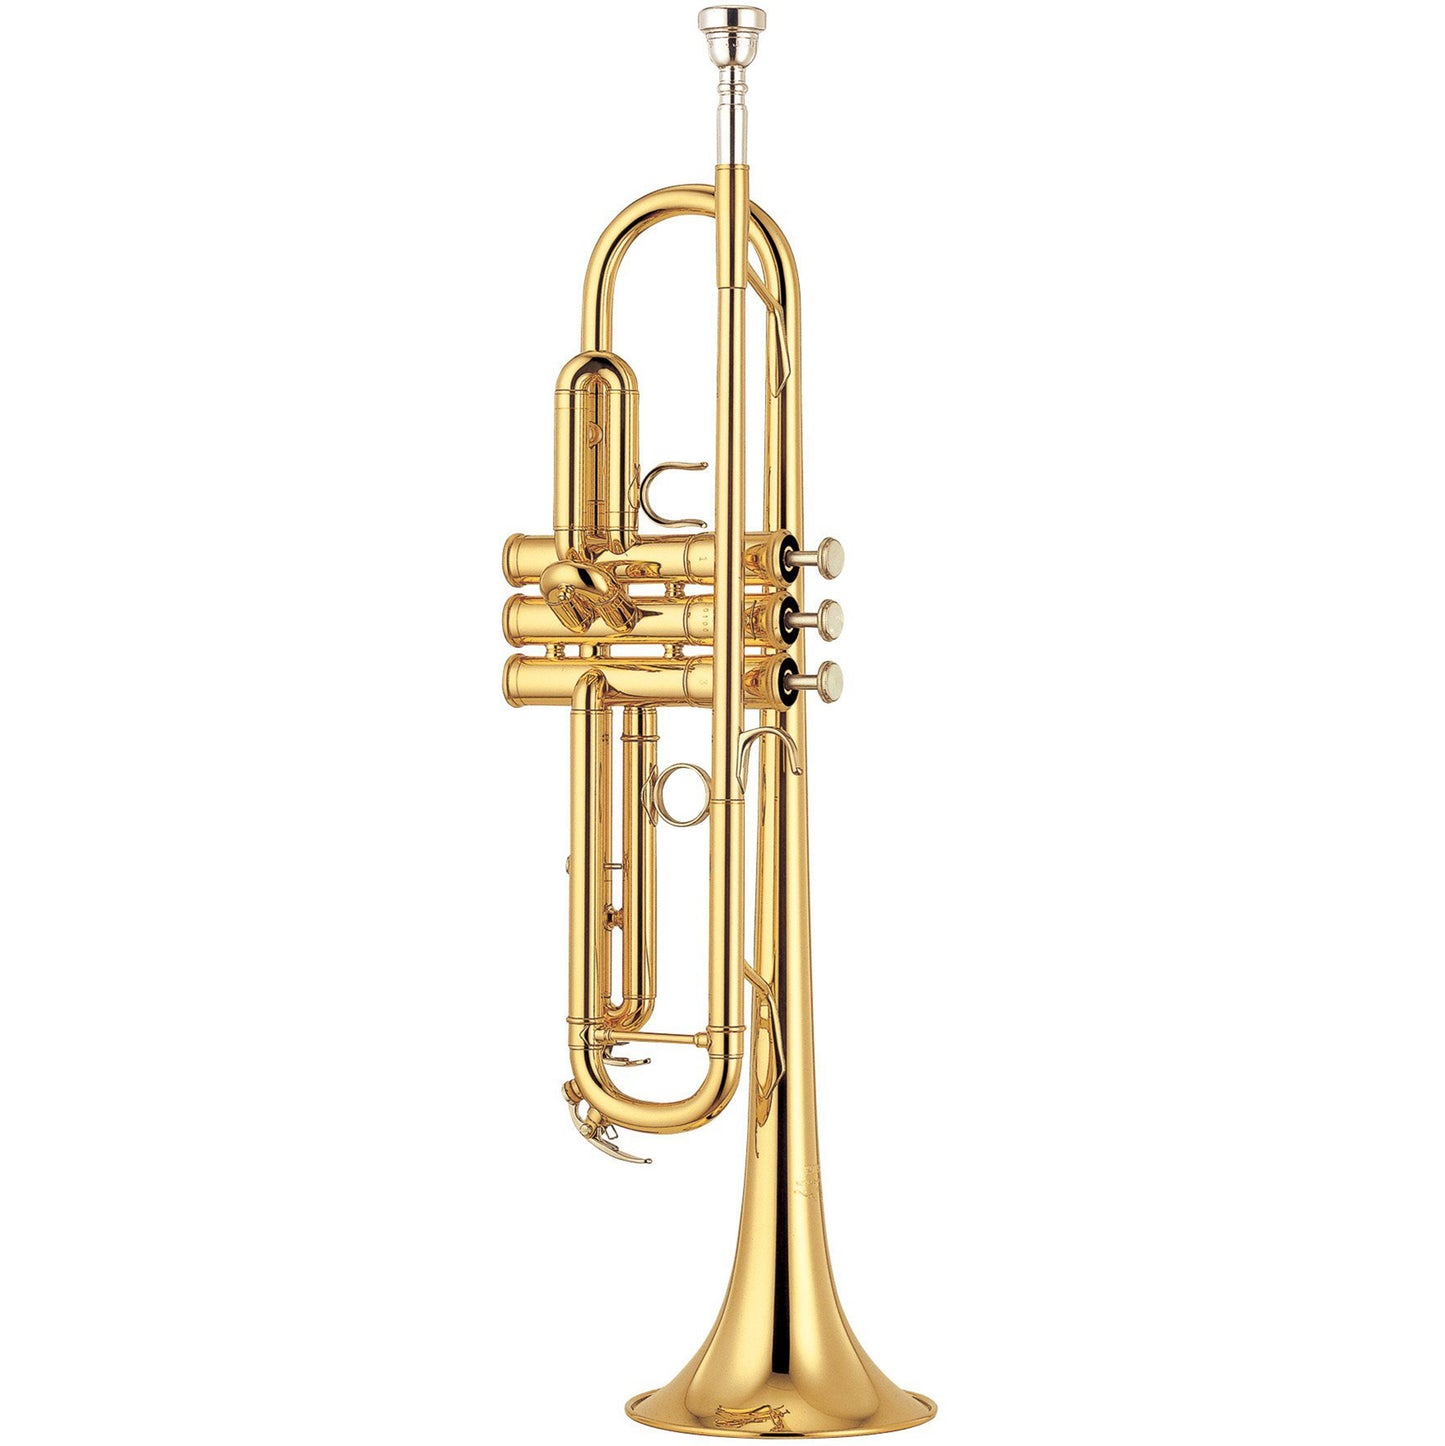 Yamaha YTR6335 Professional Trumpet in Gold Lacquer